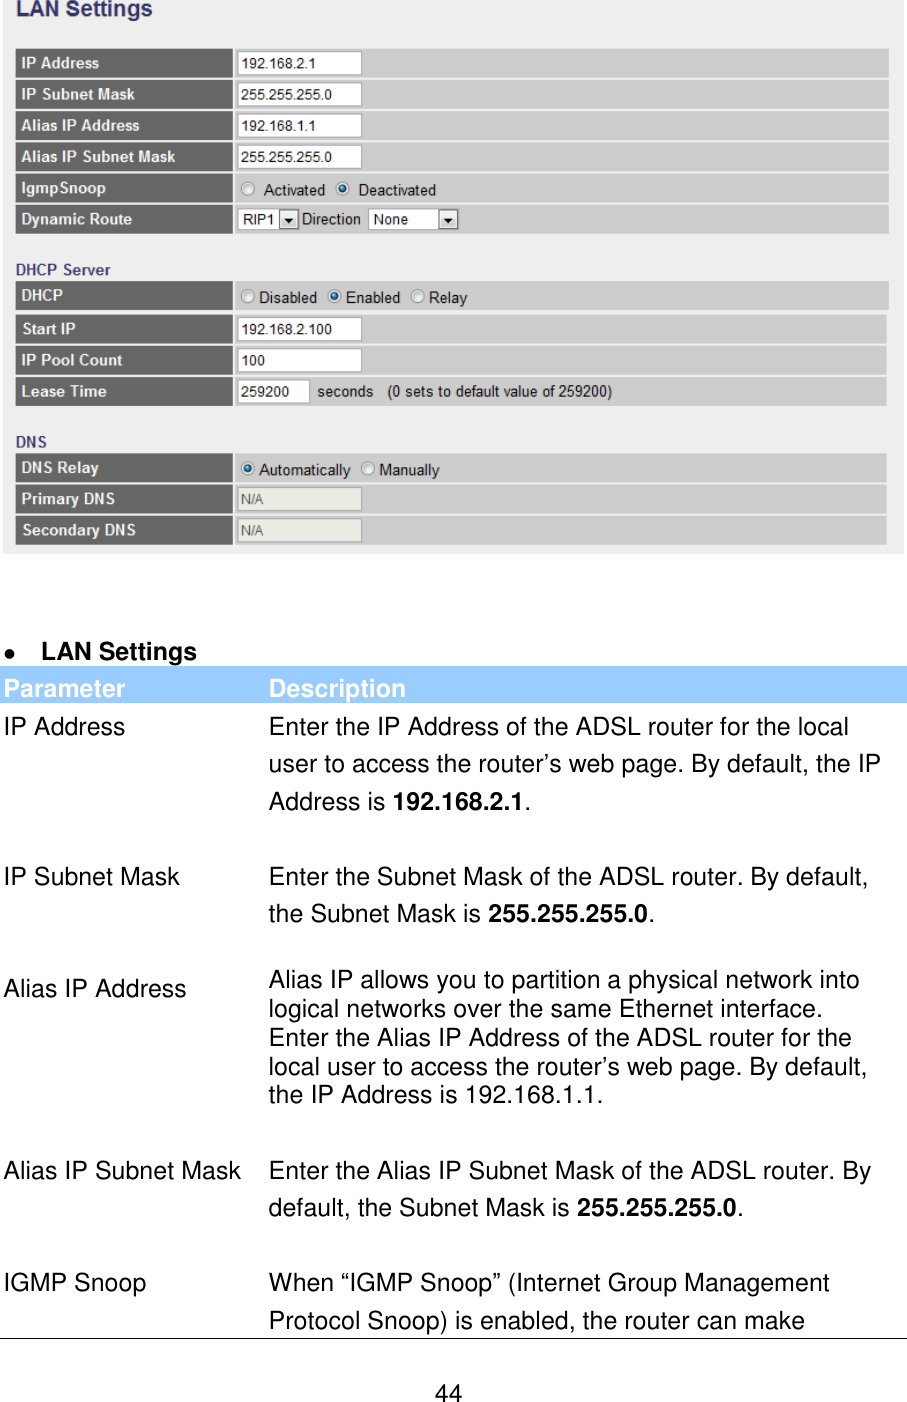   44     LAN Settings Parameter Description IP Address Enter the IP Address of the ADSL router for the local user to access the router’s web page. By default, the IP Address is 192.168.2.1.   IP Subnet Mask Enter the Subnet Mask of the ADSL router. By default, the Subnet Mask is 255.255.255.0.   Alias IP Address Alias IP allows you to partition a physical network into logical networks over the same Ethernet interface.  Enter the Alias IP Address of the ADSL router for the local user to access the router’s web page. By default, the IP Address is 192.168.1.1.   Alias IP Subnet Mask Enter the Alias IP Subnet Mask of the ADSL router. By default, the Subnet Mask is 255.255.255.0.   IGMP Snoop When “IGMP Snoop” (Internet Group Management Protocol Snoop) is enabled, the router can make 